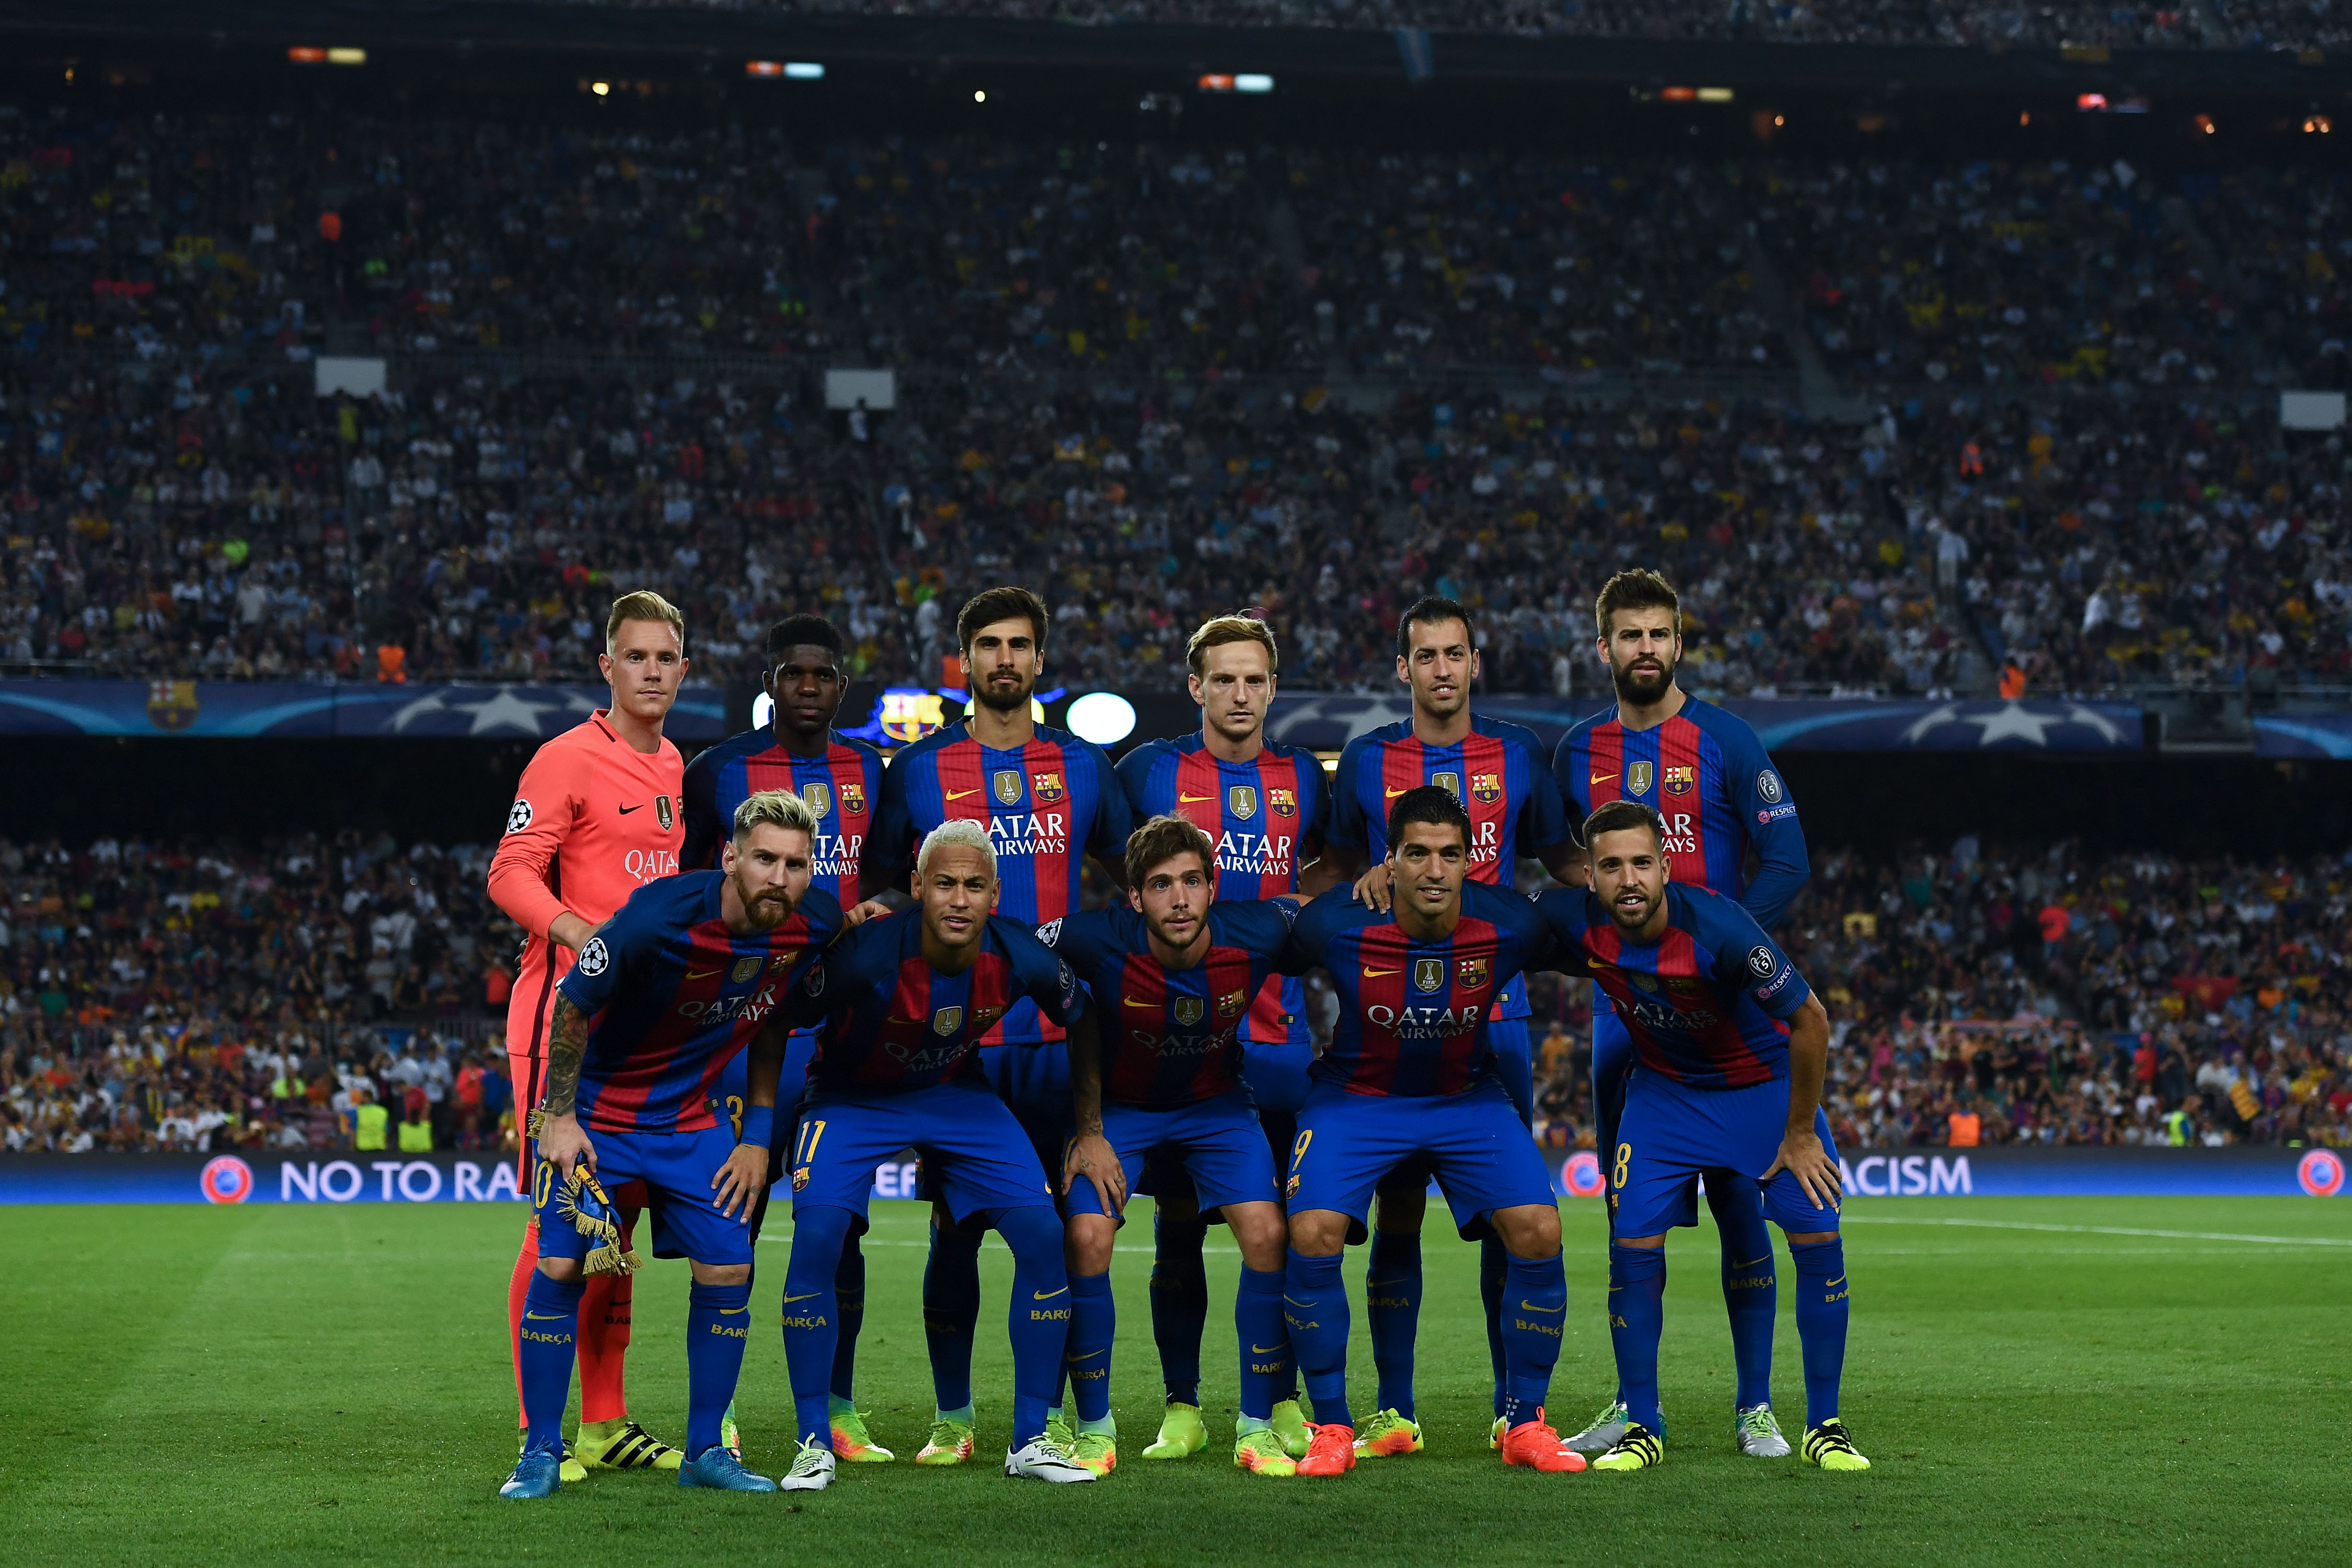 BARCELONA, SPAIN - SEPTEMBER 13: FC Barcelona players pose for a team picture prior to the UEFA Champions League Group C match between FC Barcelona and Celtic FC at Camp Nou on September 13, 2016 in Barcelona, .  (Photo by David Ramos/Getty Images)